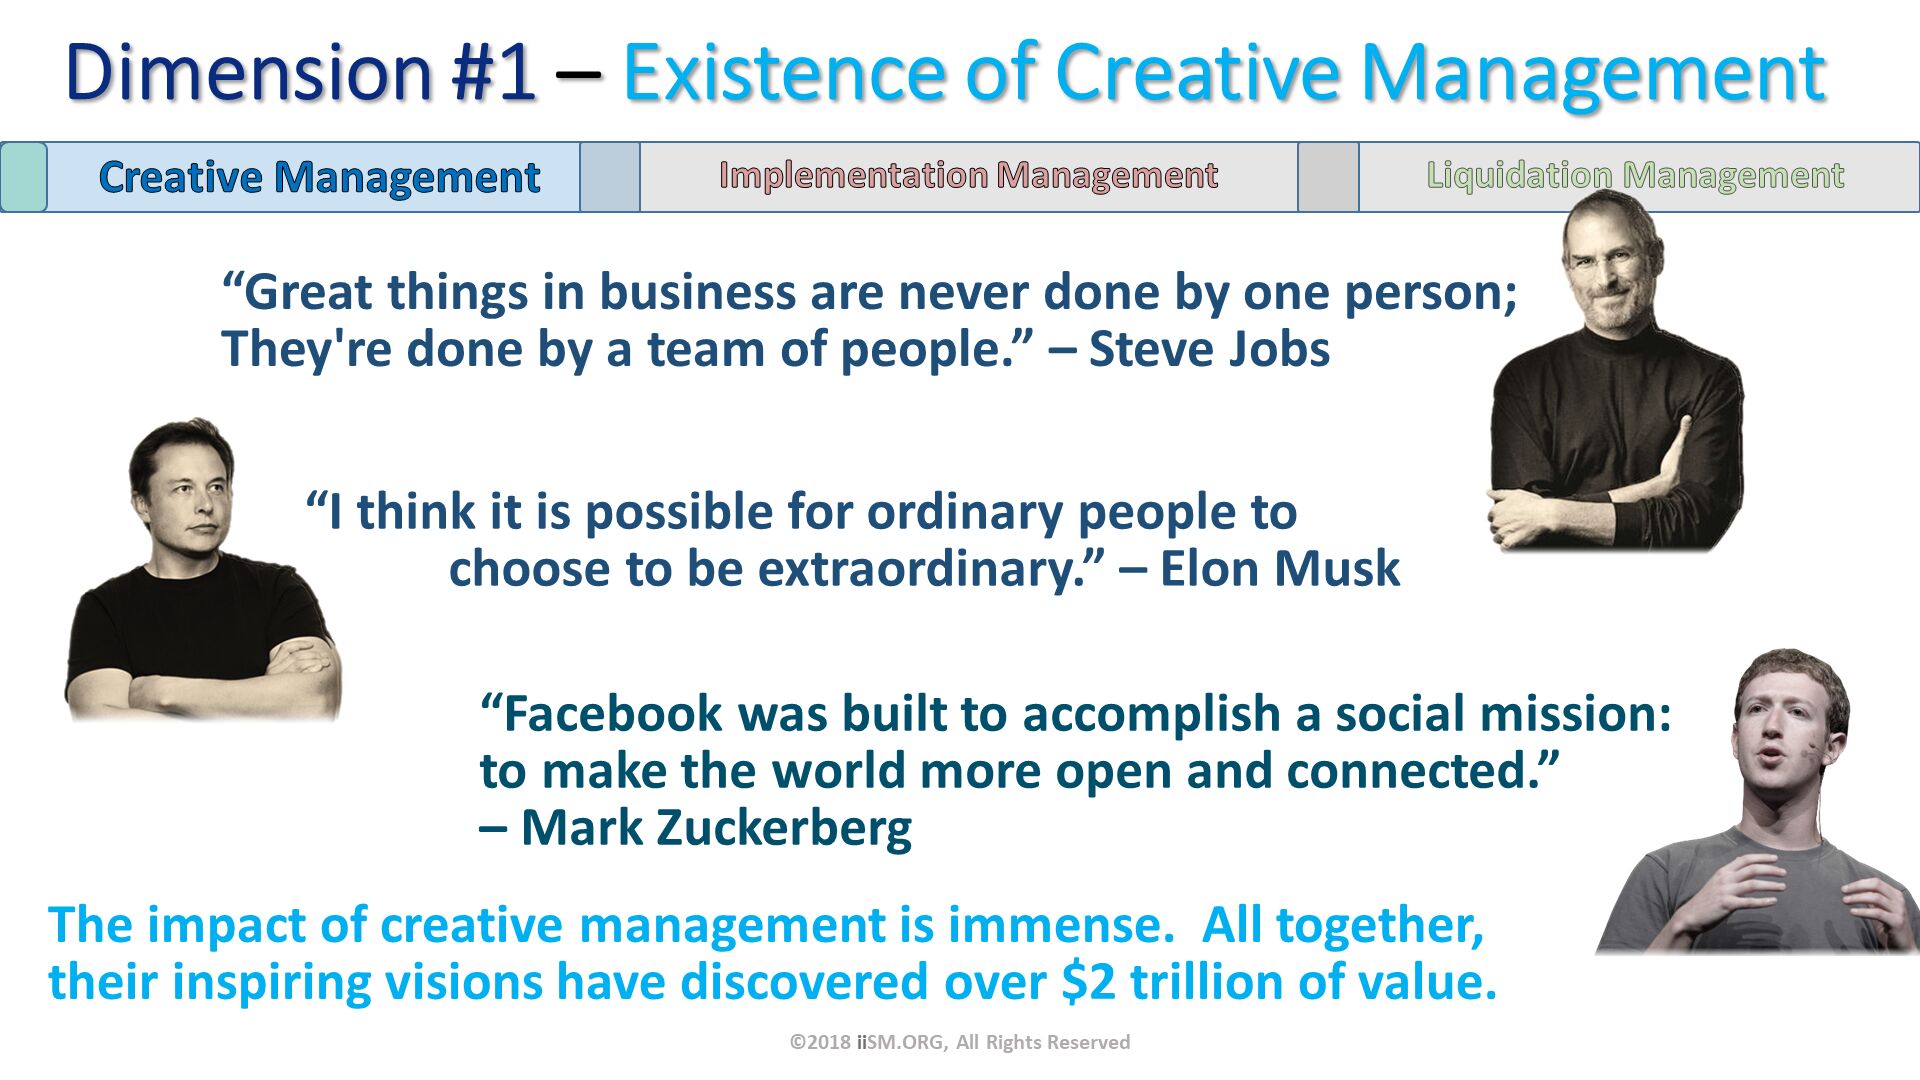 Dimension #1 – Existence of Creative Management. “I think it is possible for ordinary people to 	choose to be extraordinary.” – Elon Musk. “Facebook was built to accomplish a social mission: to make the world more open and connected.” – Mark Zuckerberg. “Great things in business are never done by one person; They're done by a team of people.” – Steve Jobs. ©2018 iiSM.ORG, All Rights Reserved. The impact of creative management is immense.  All together, their inspiring visions have discovered over $2 trillion of value. 